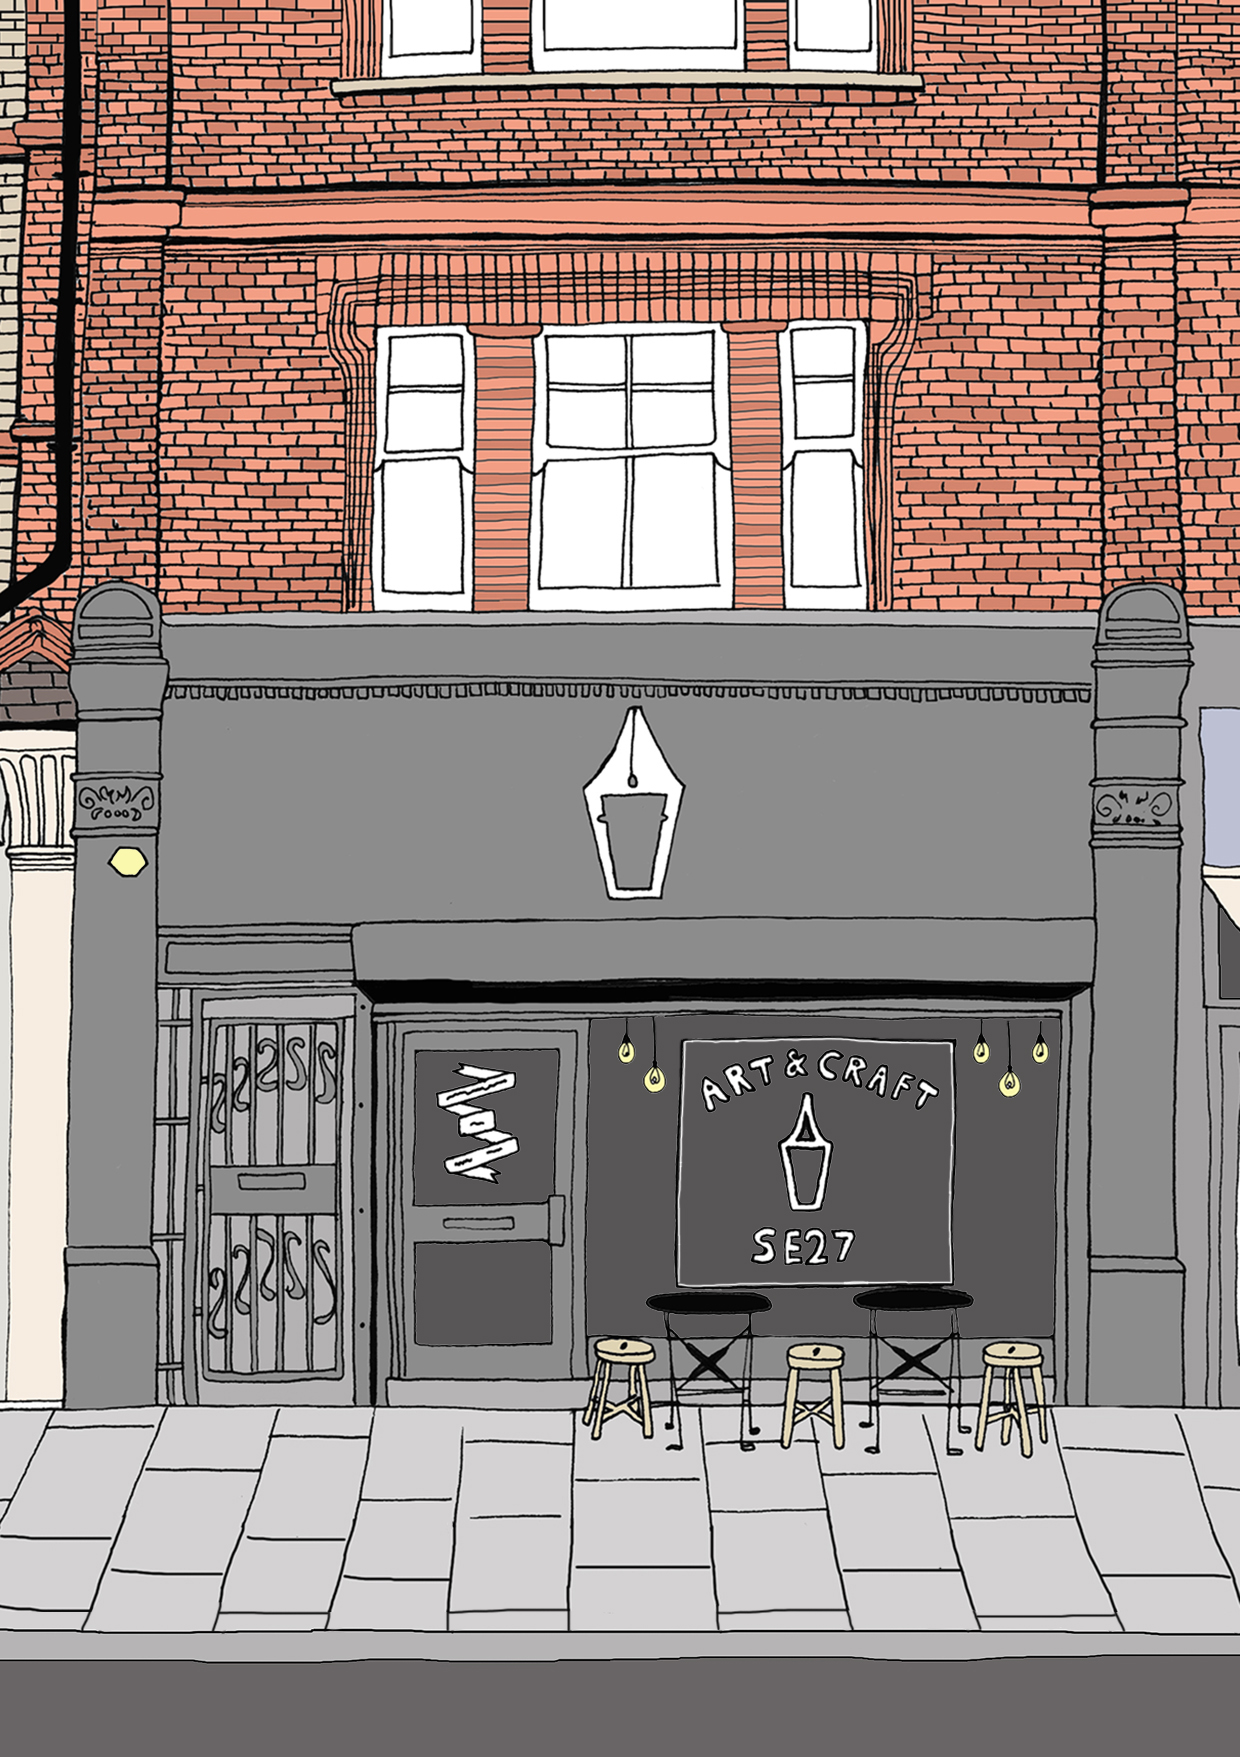 Illustration of 'Art & Craft' store, London. Used for promotional flyers. 